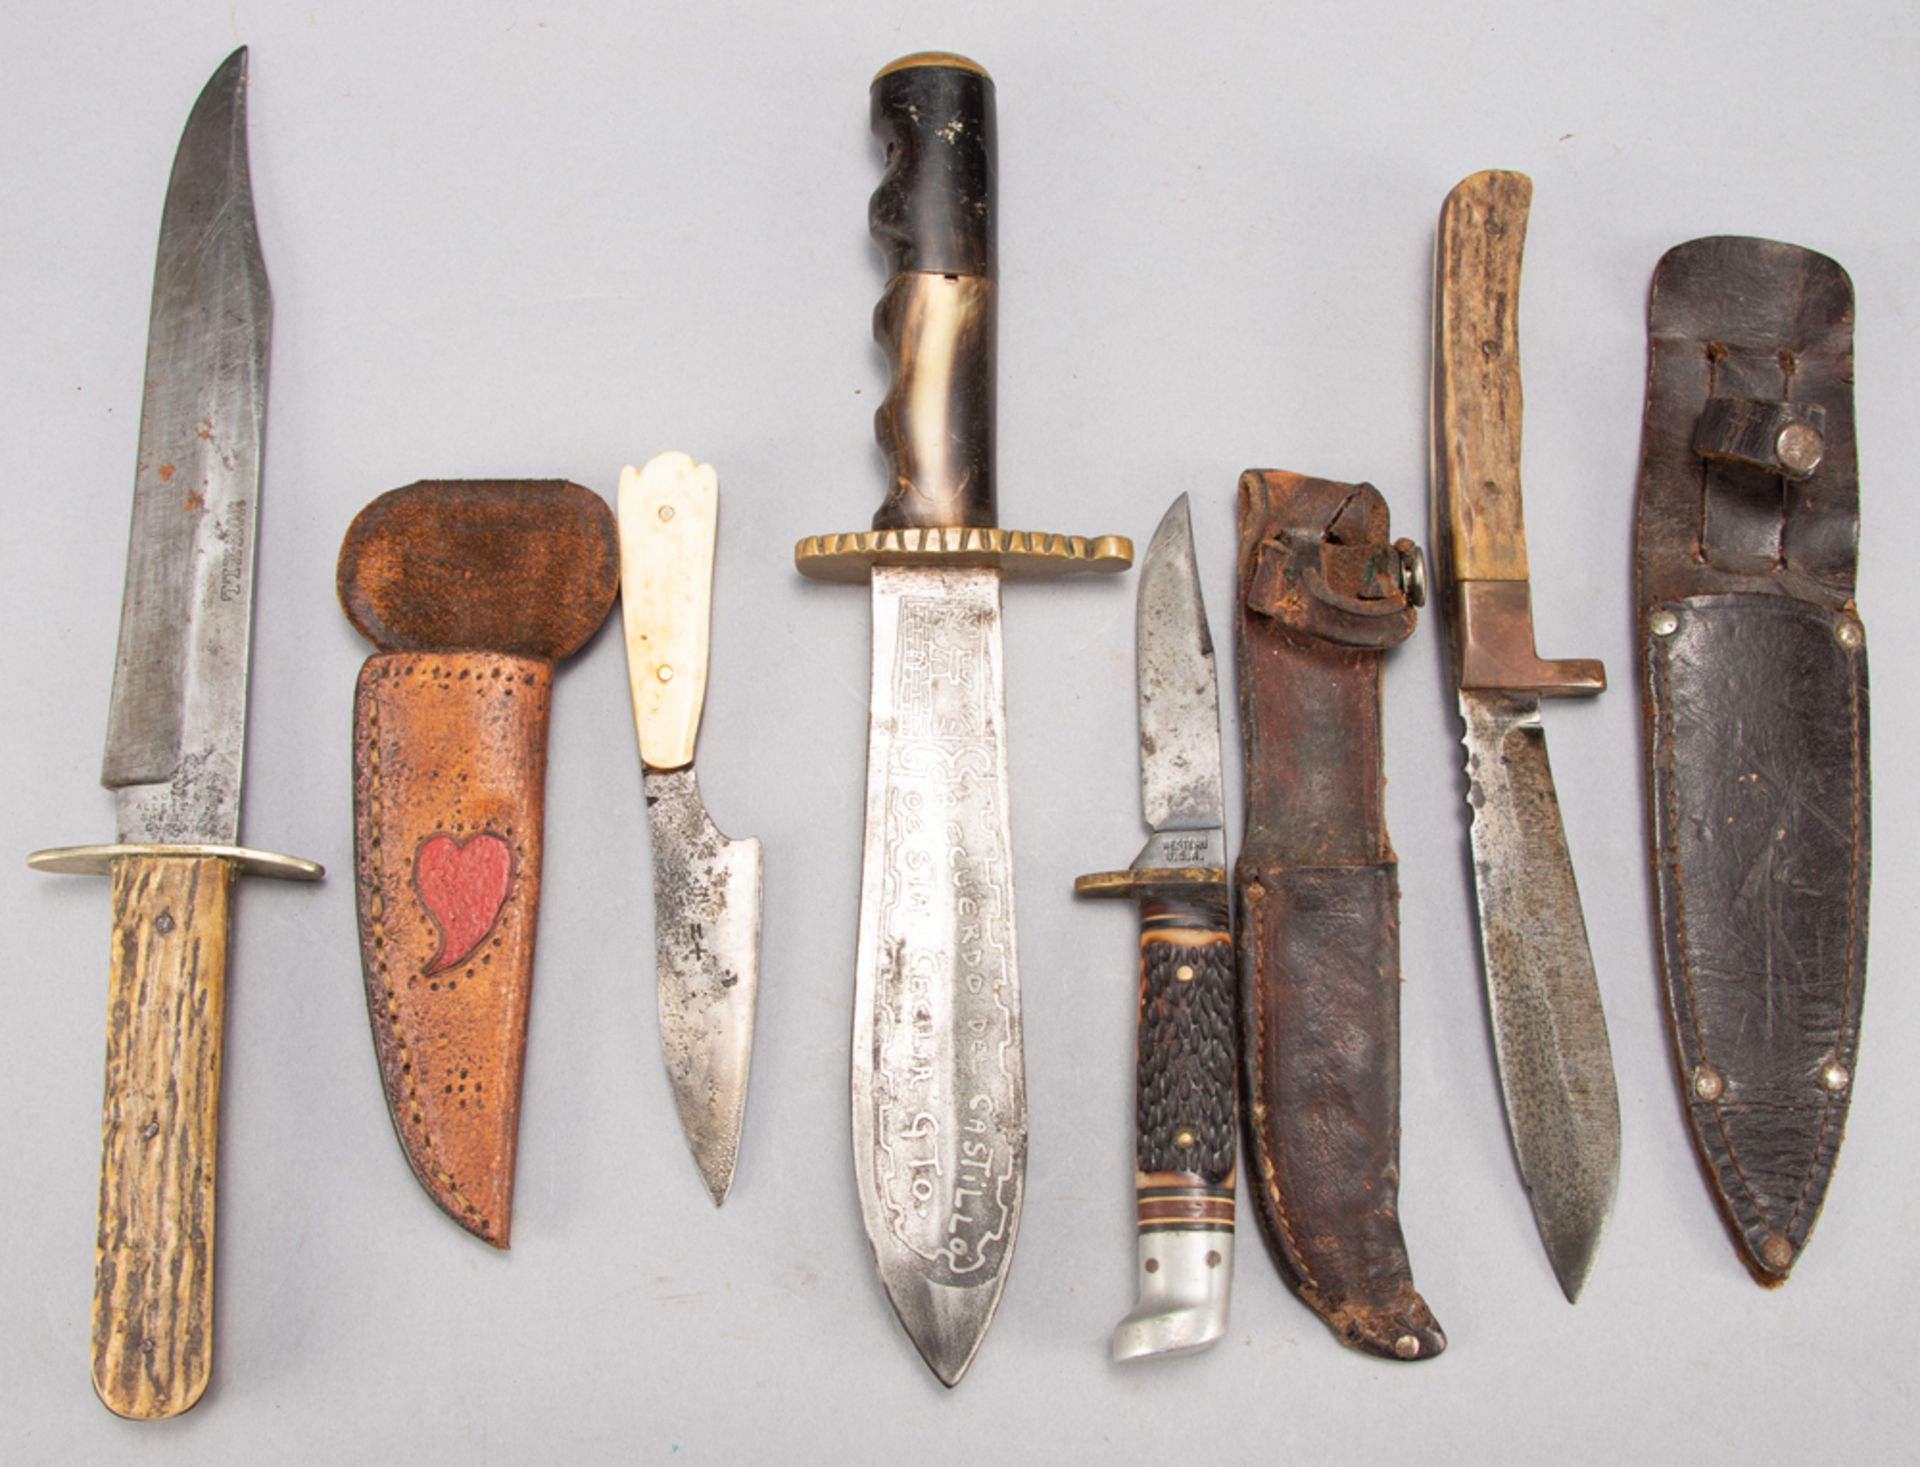 Group of five vintage Side Knives, to include left to right: (1) A buck horn handled Side Knife mark